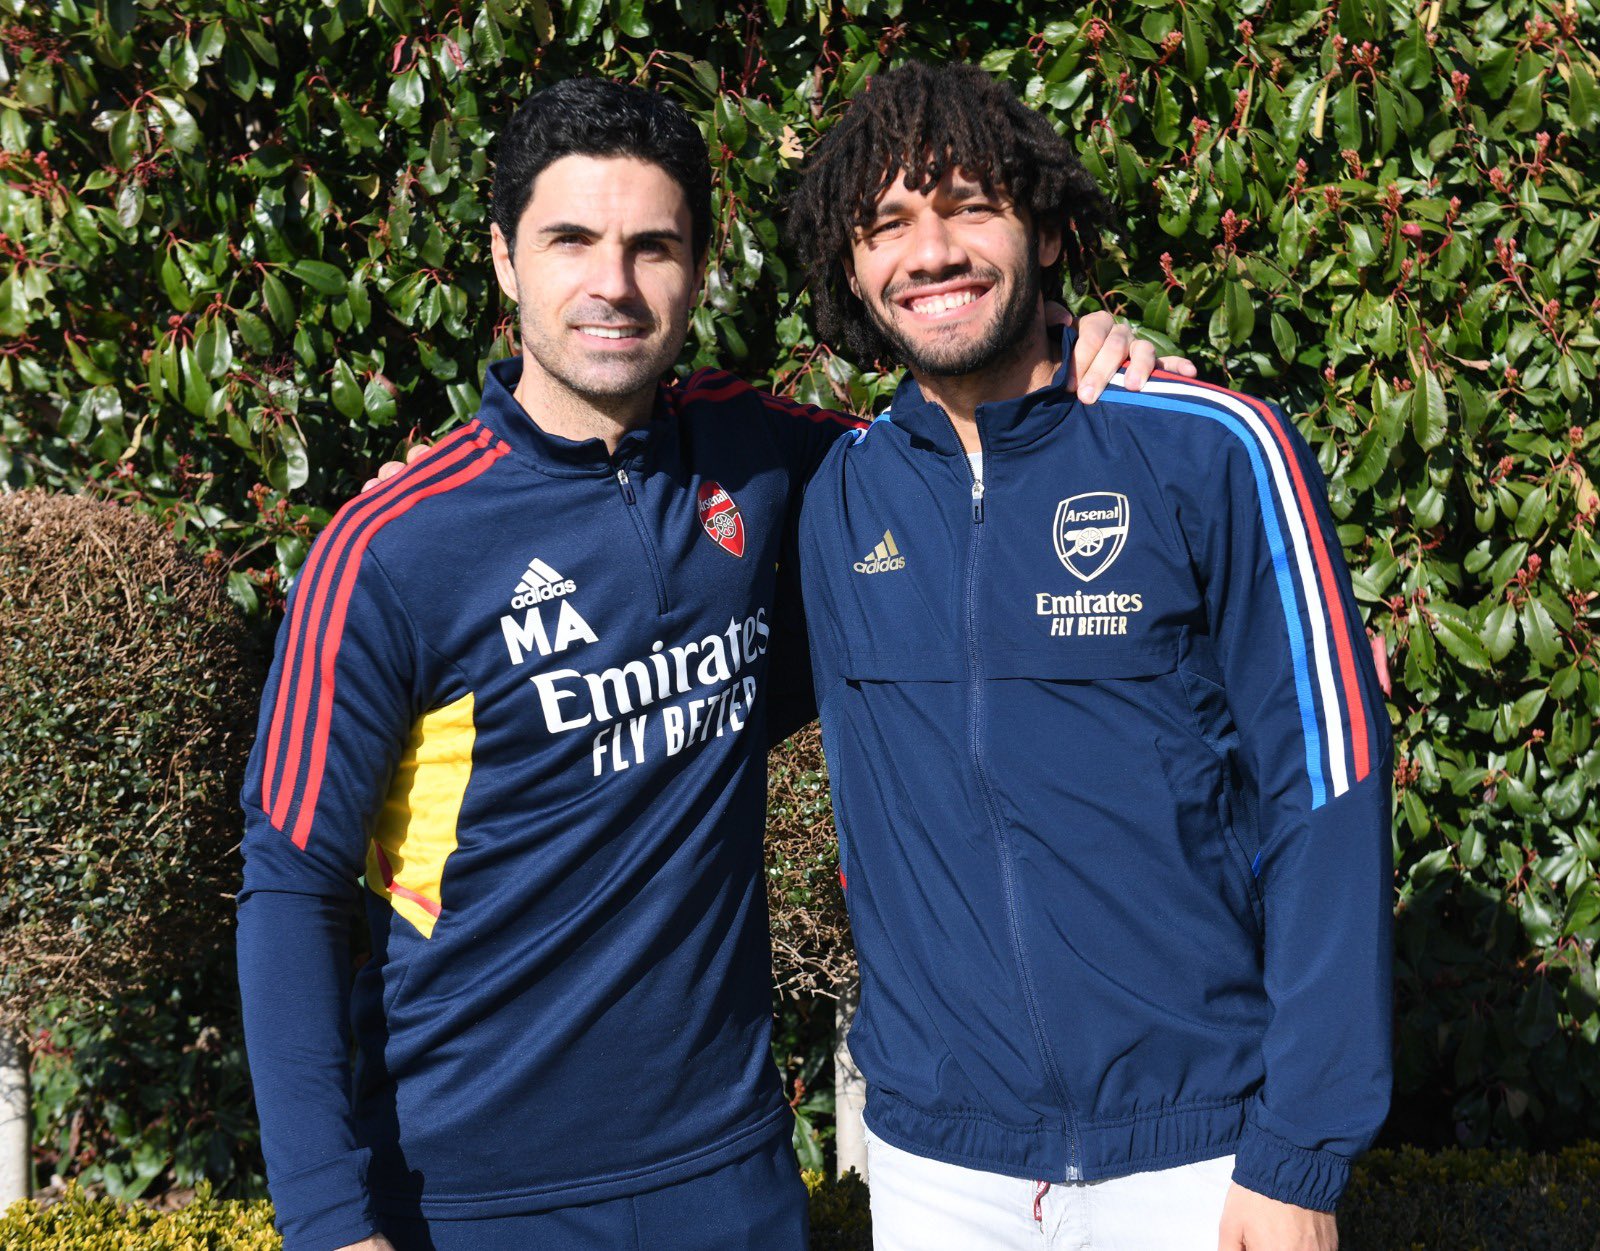 Mohamed Elneny with Mikel Arteta after signing a new contract with Arsenal (Photo via Elneny on Twitter)